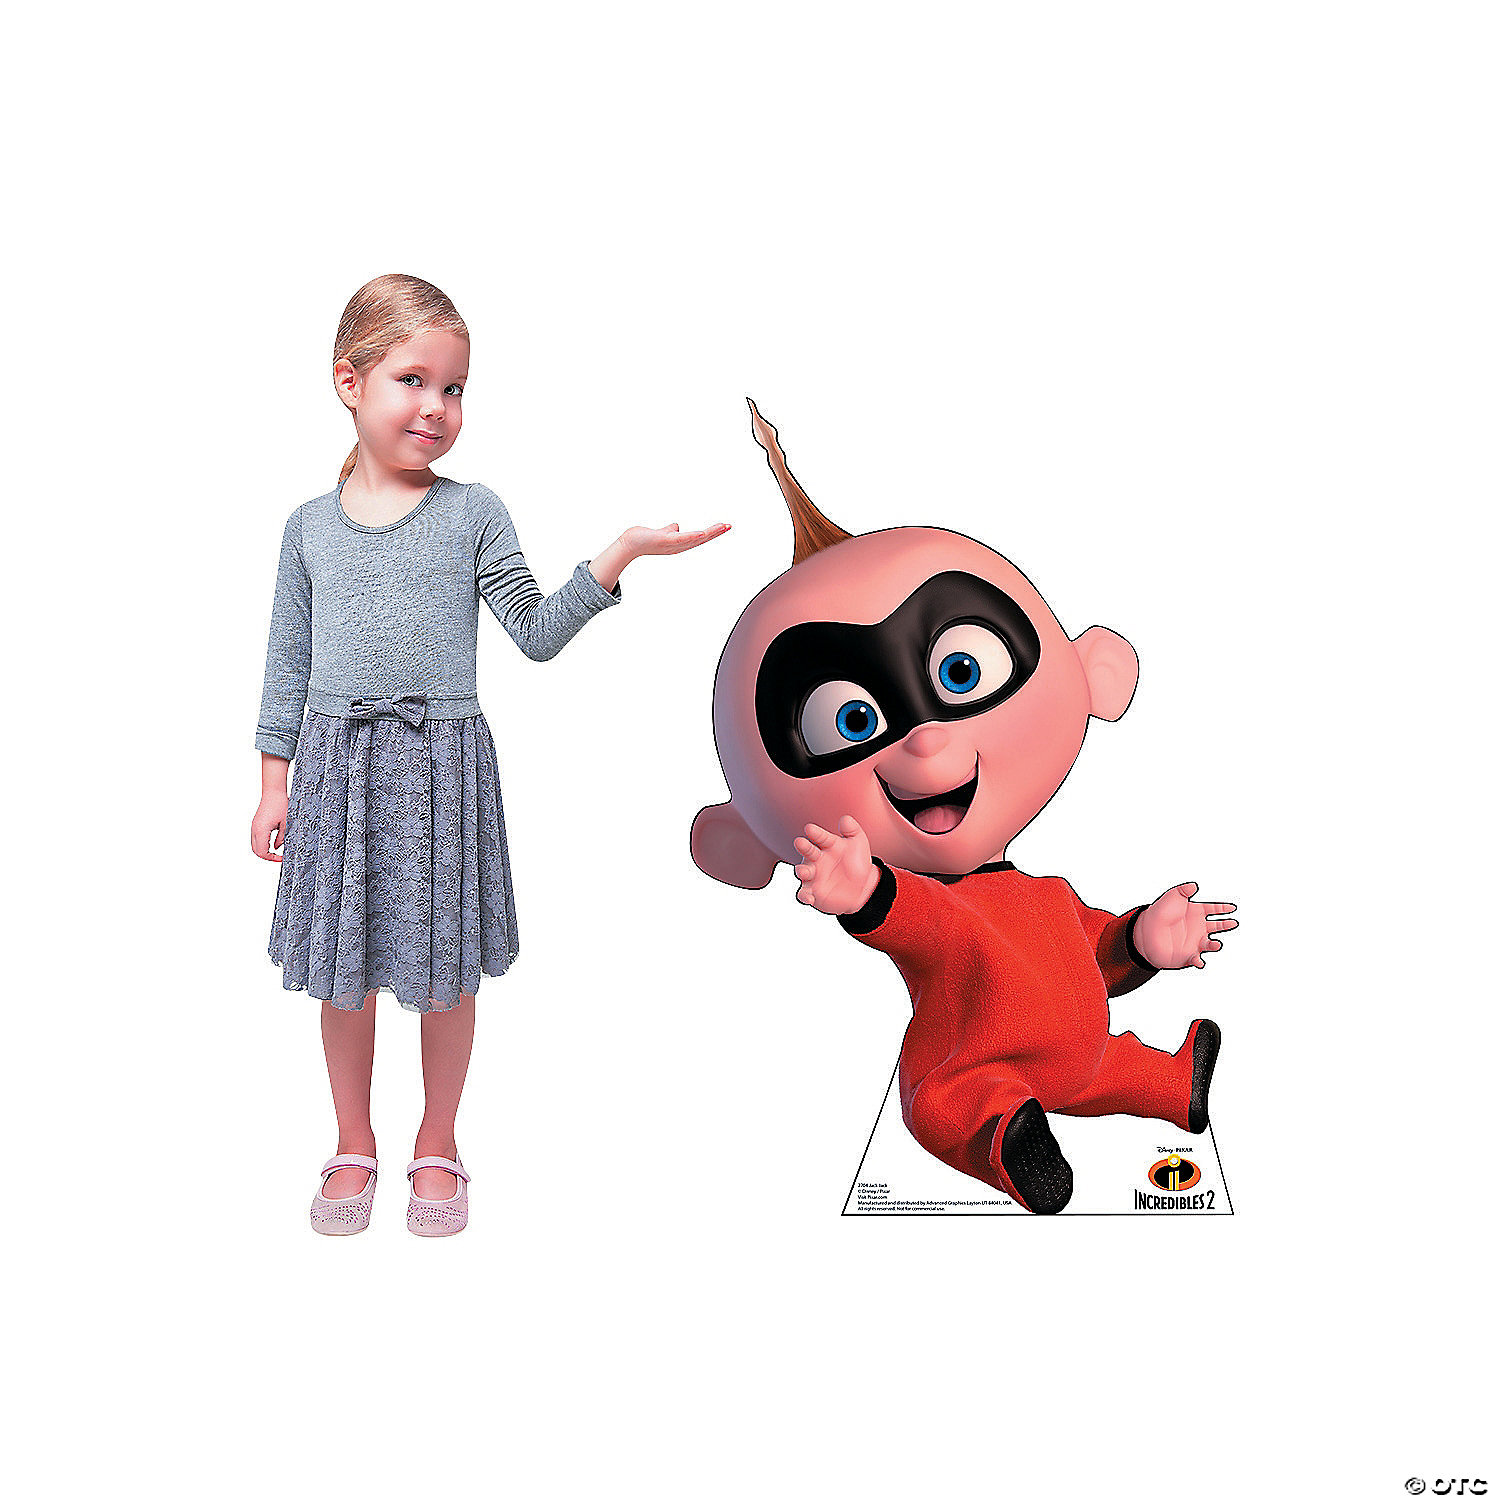 Jack Jack Parr And Elastigirl The Incredibles 2 Wallpapers